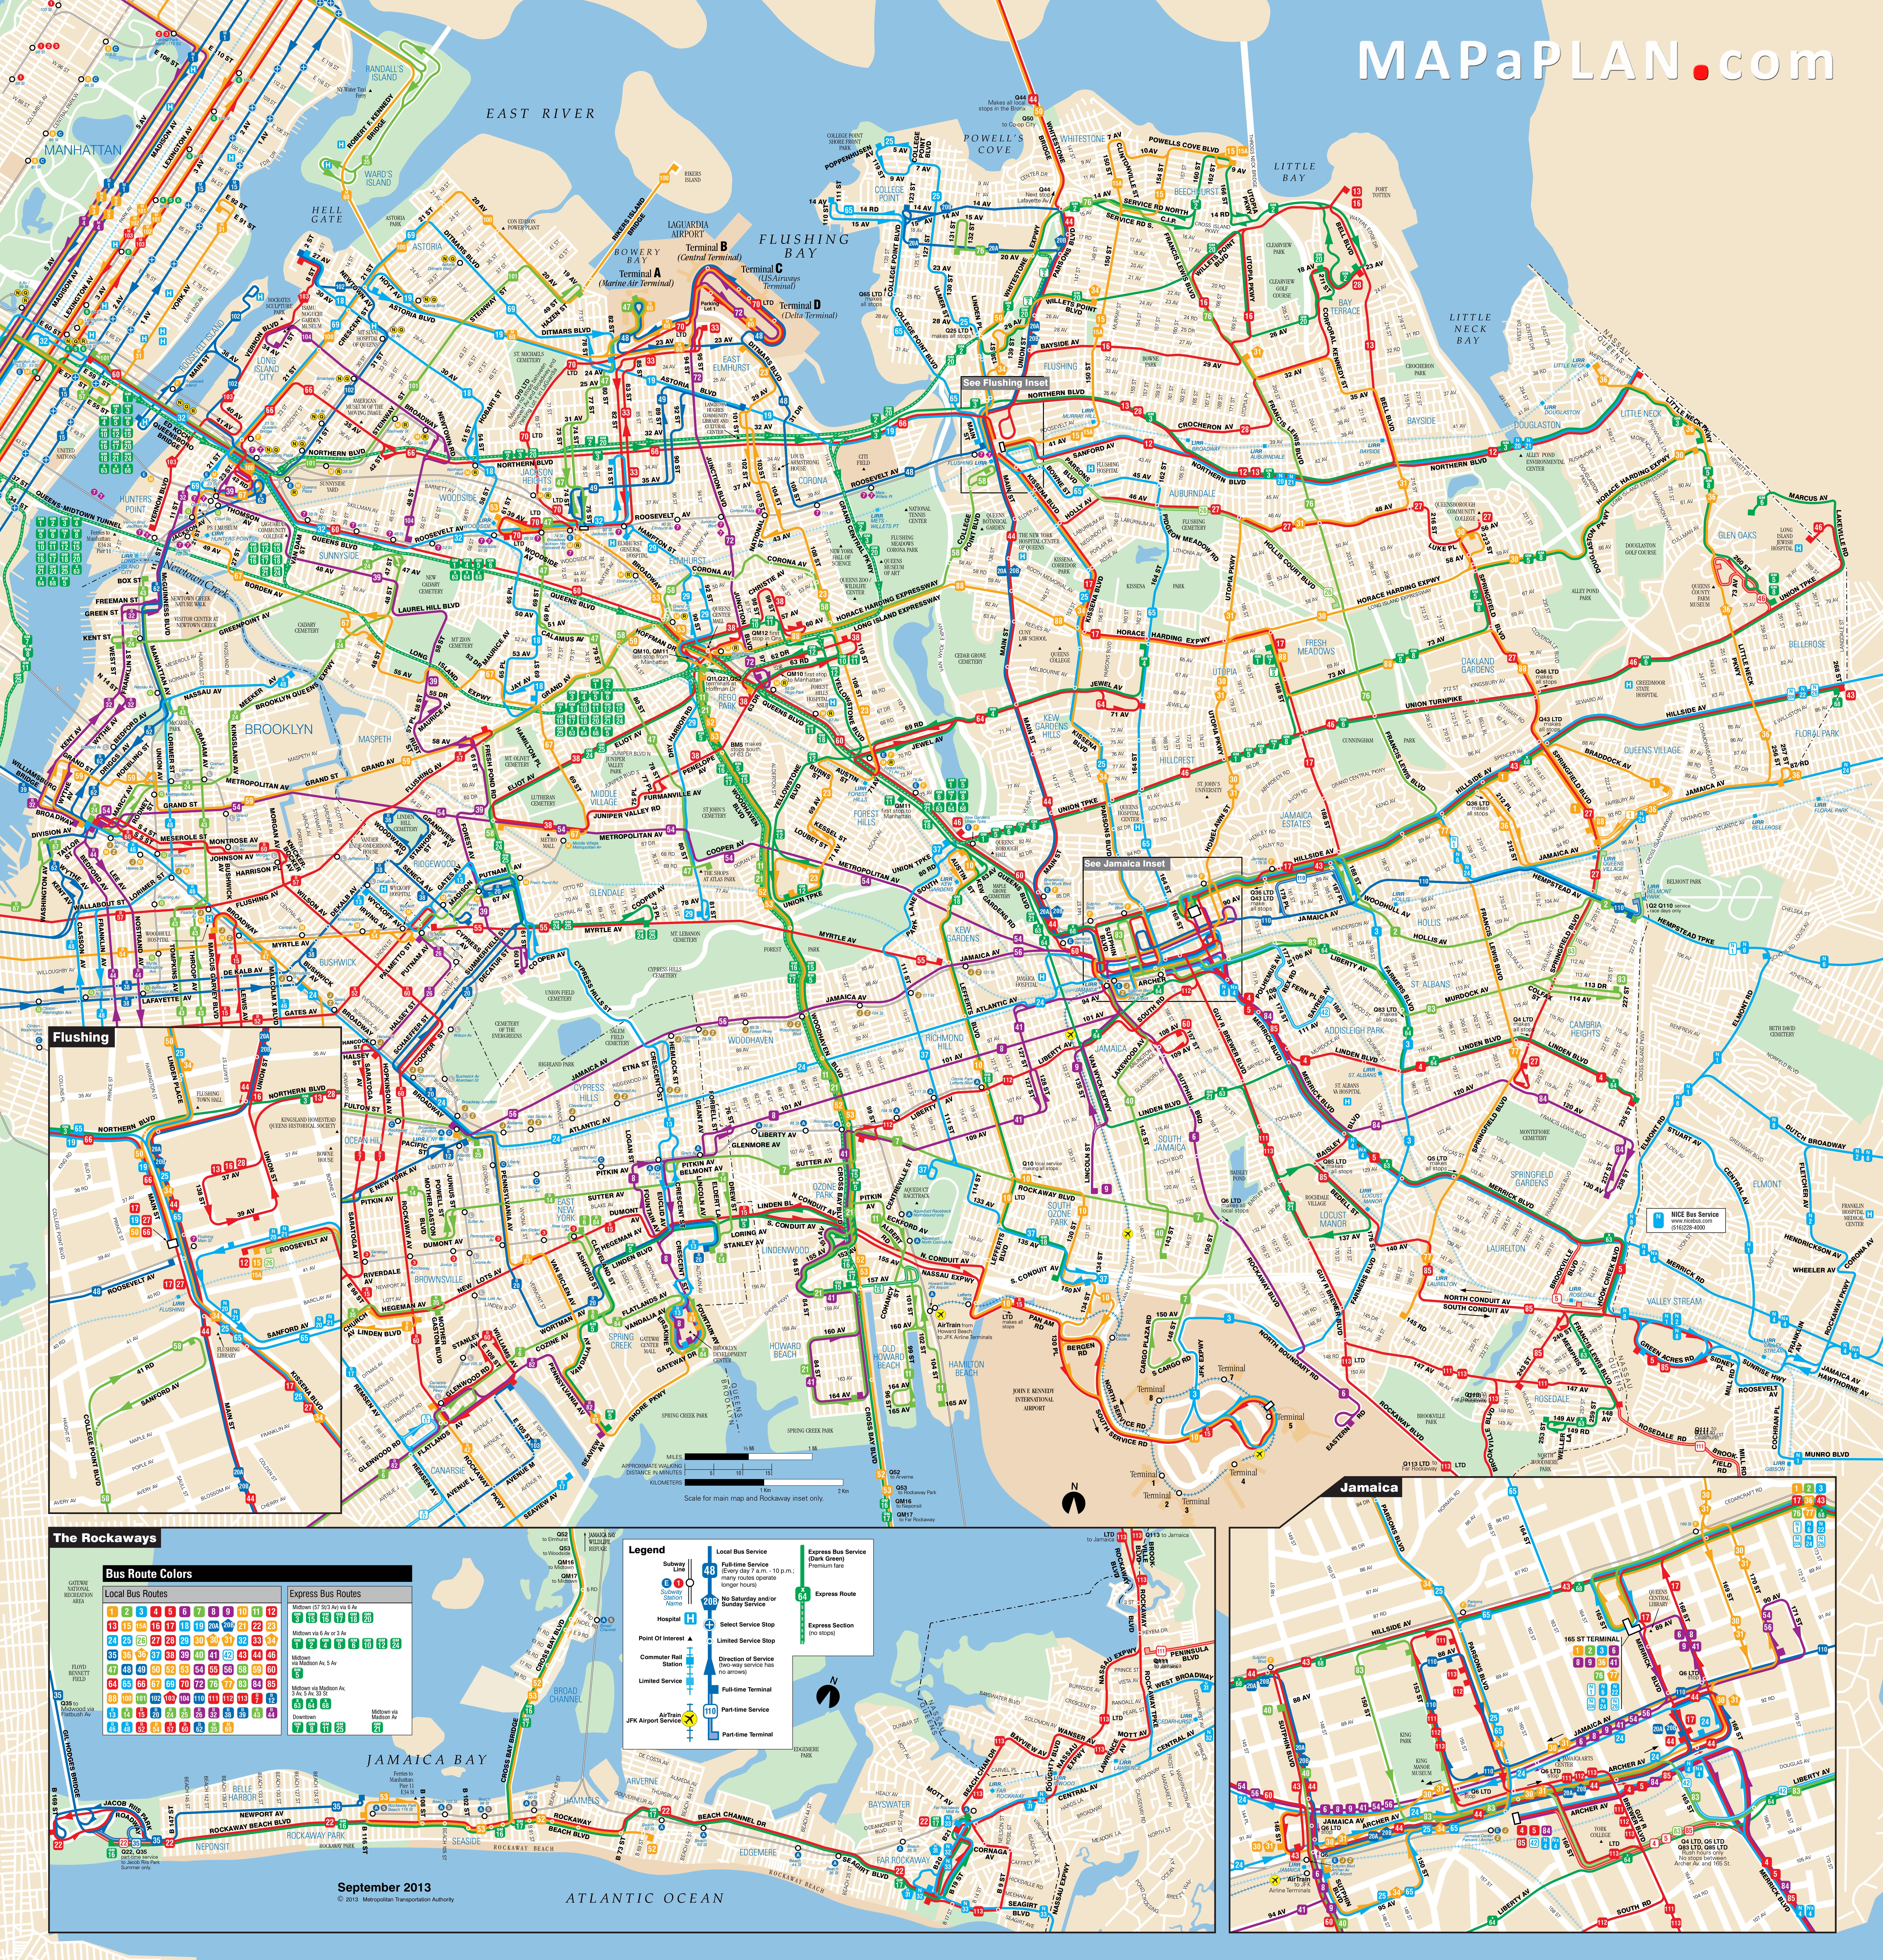 queens-bus-map-new-york-top-tourist-attractions-map